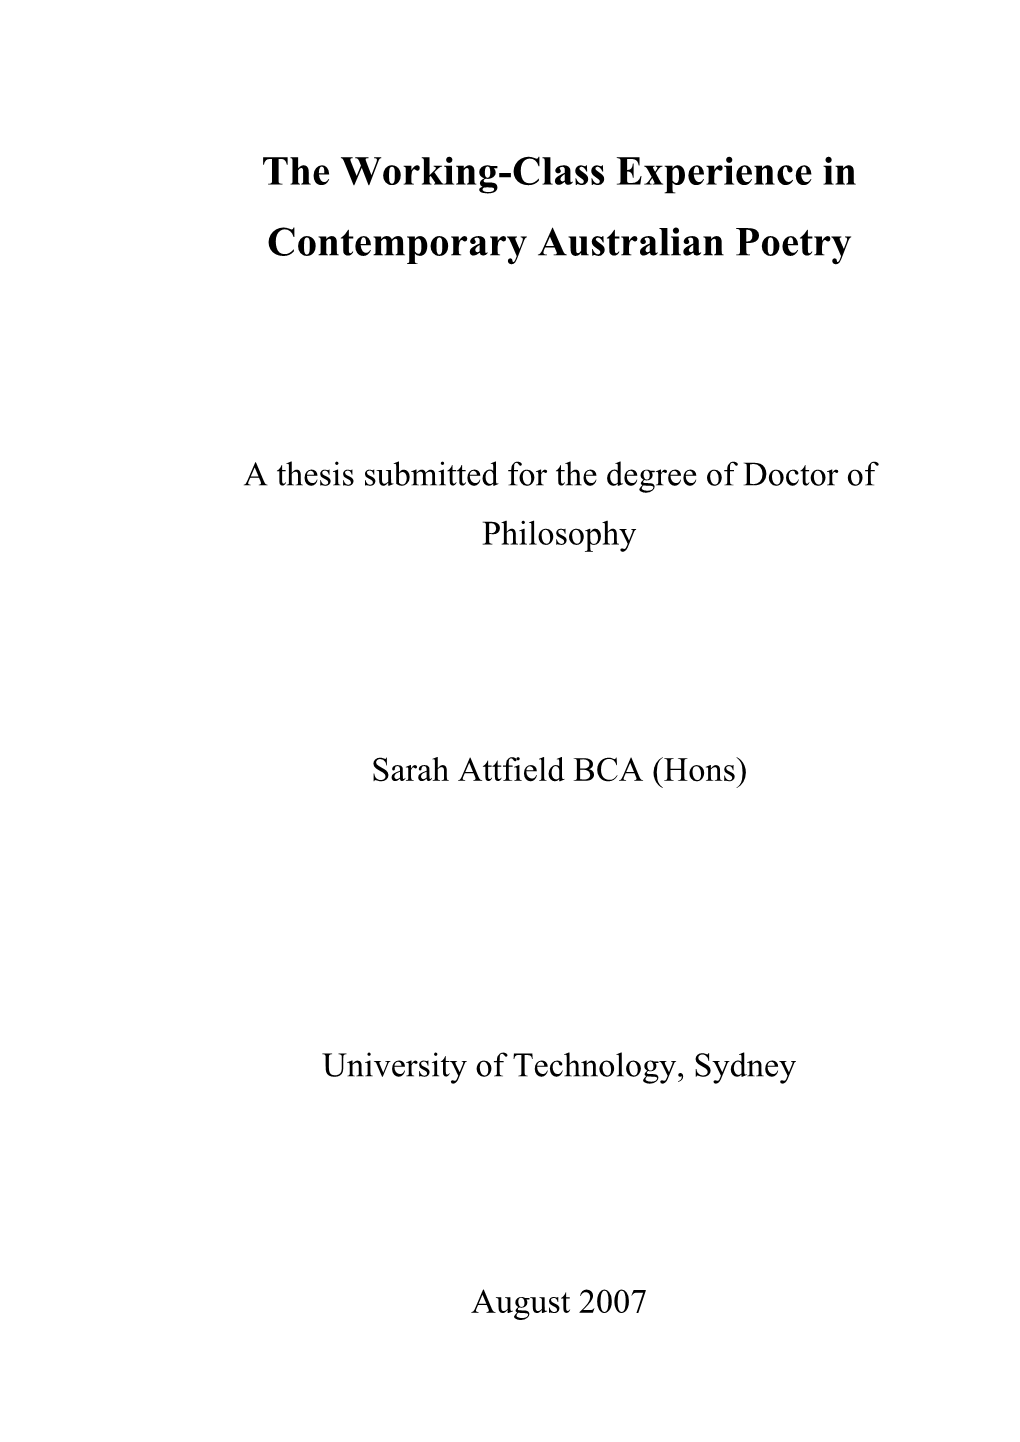 The Working-Class Experience in Contemporary Australian Poetry